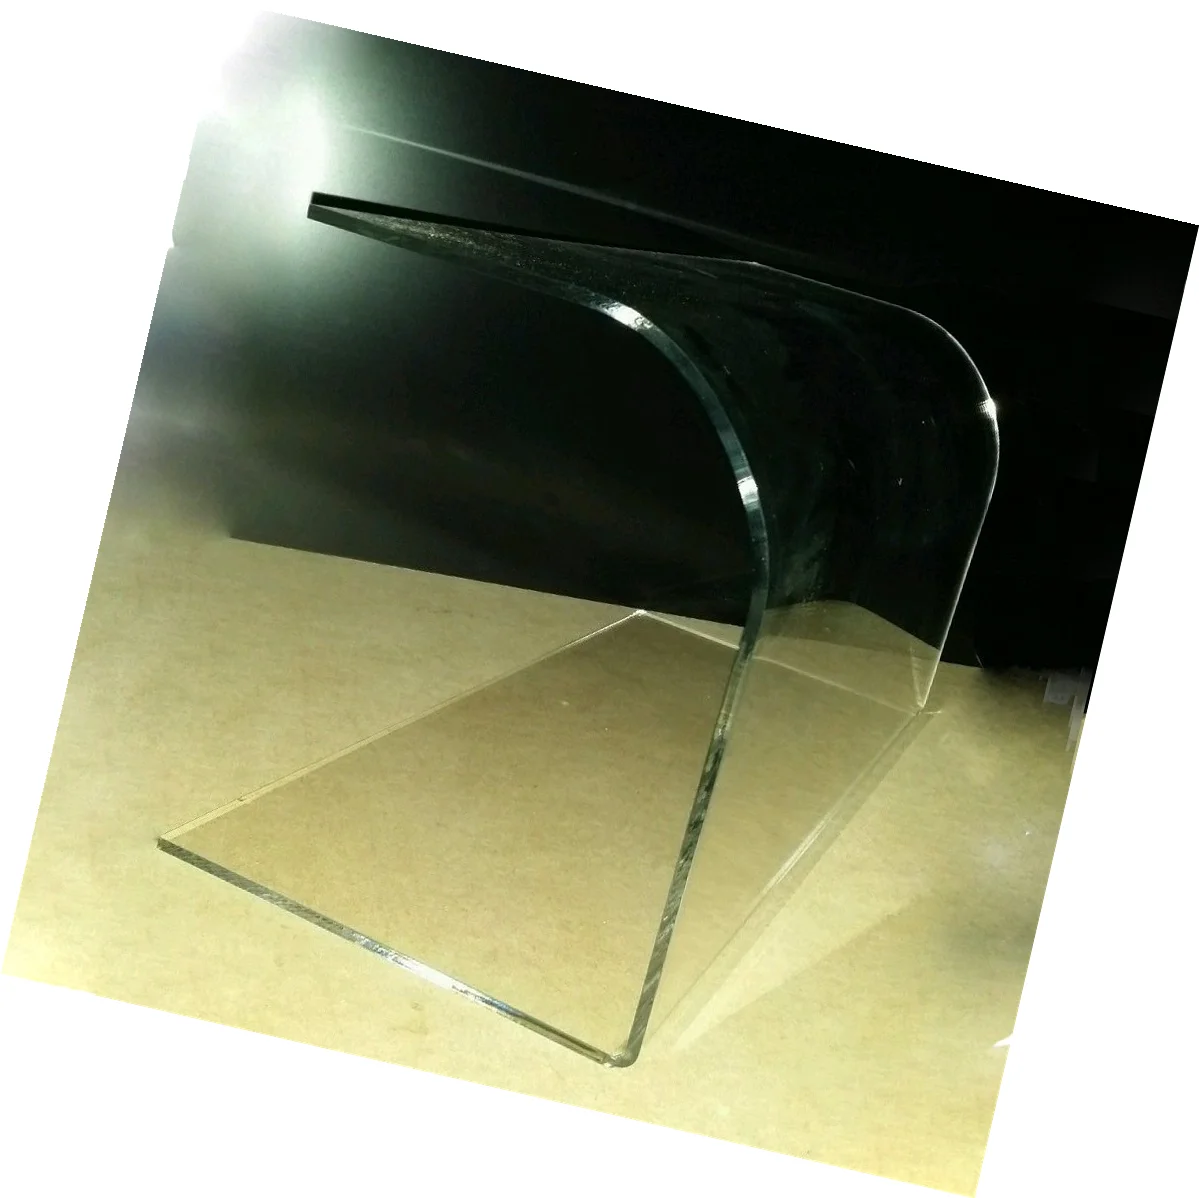 High Quality Low Cost/Budget/Economy Perspex Sneeze Guard/Screen Food Protector 